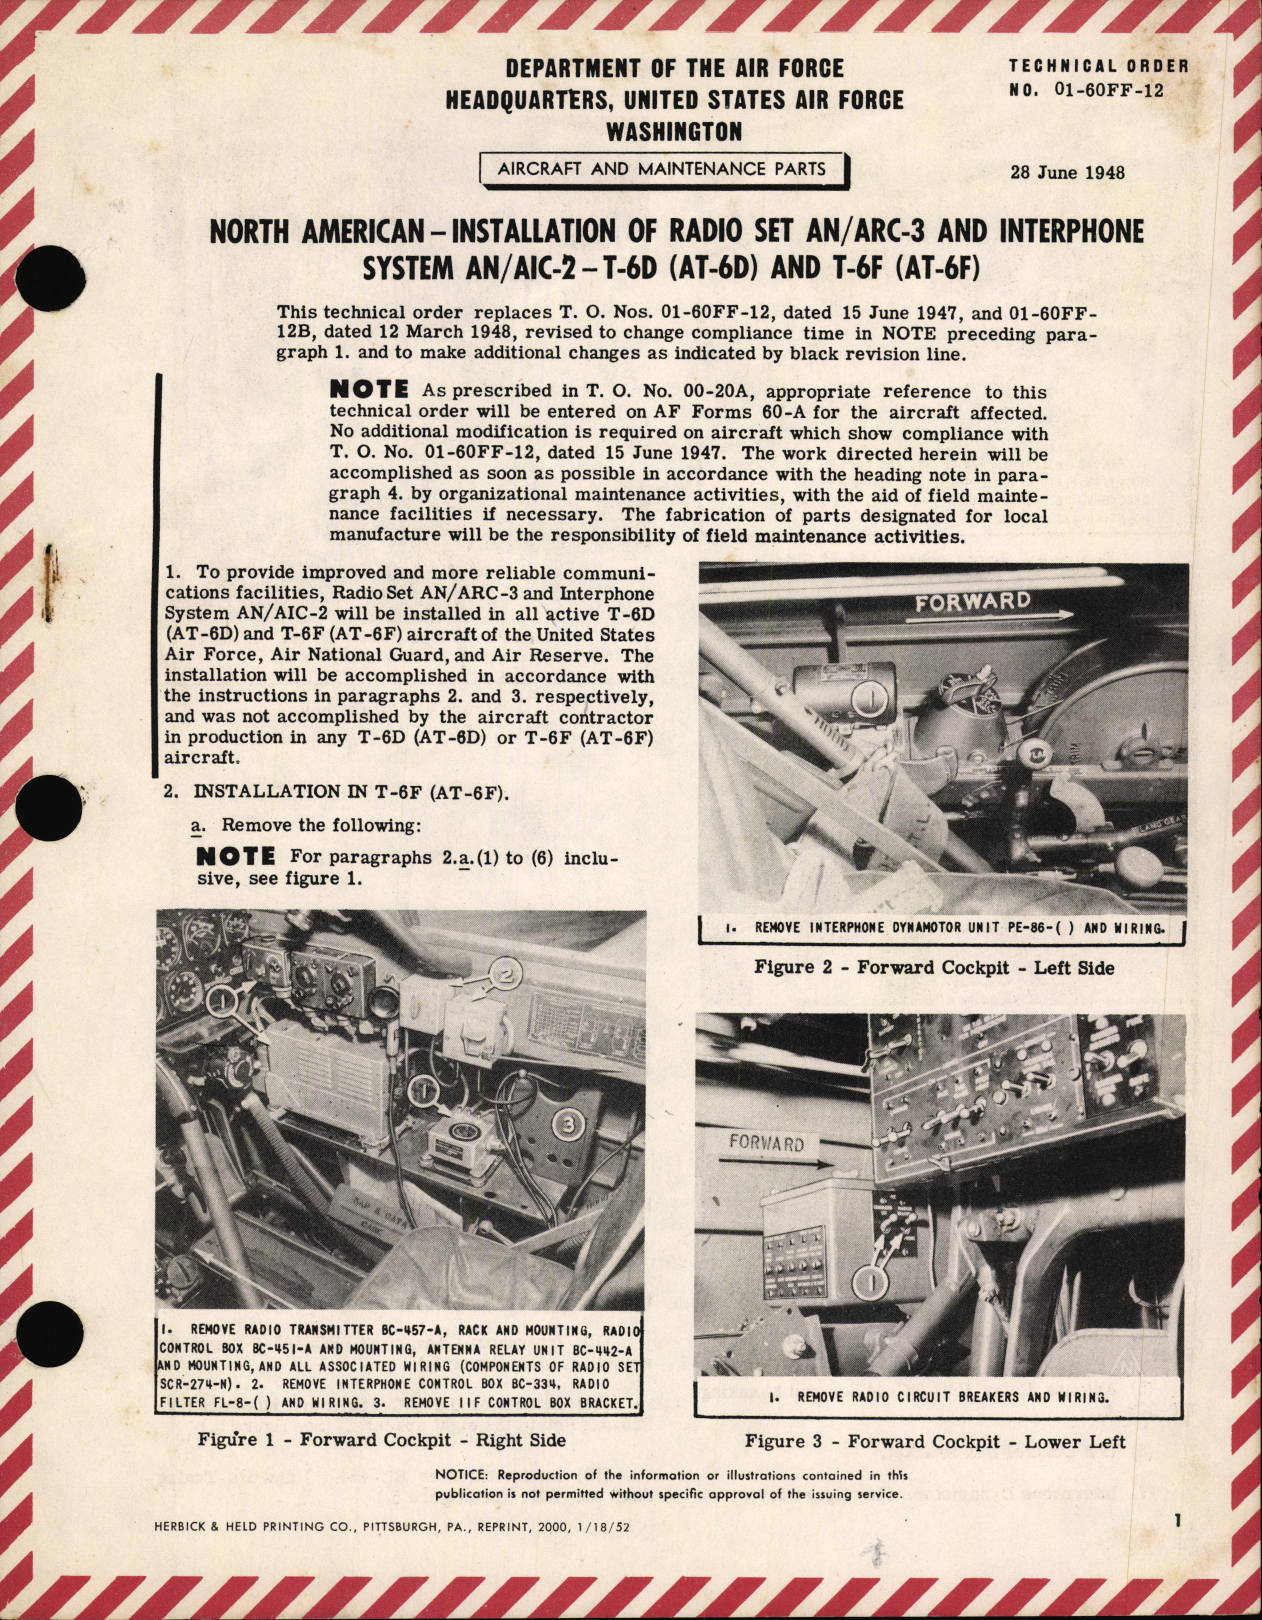 Sample page 1 from AirCorps Library document: Installation of Radio Set AN/ARC-3 and Interphone System AN/AIC-2